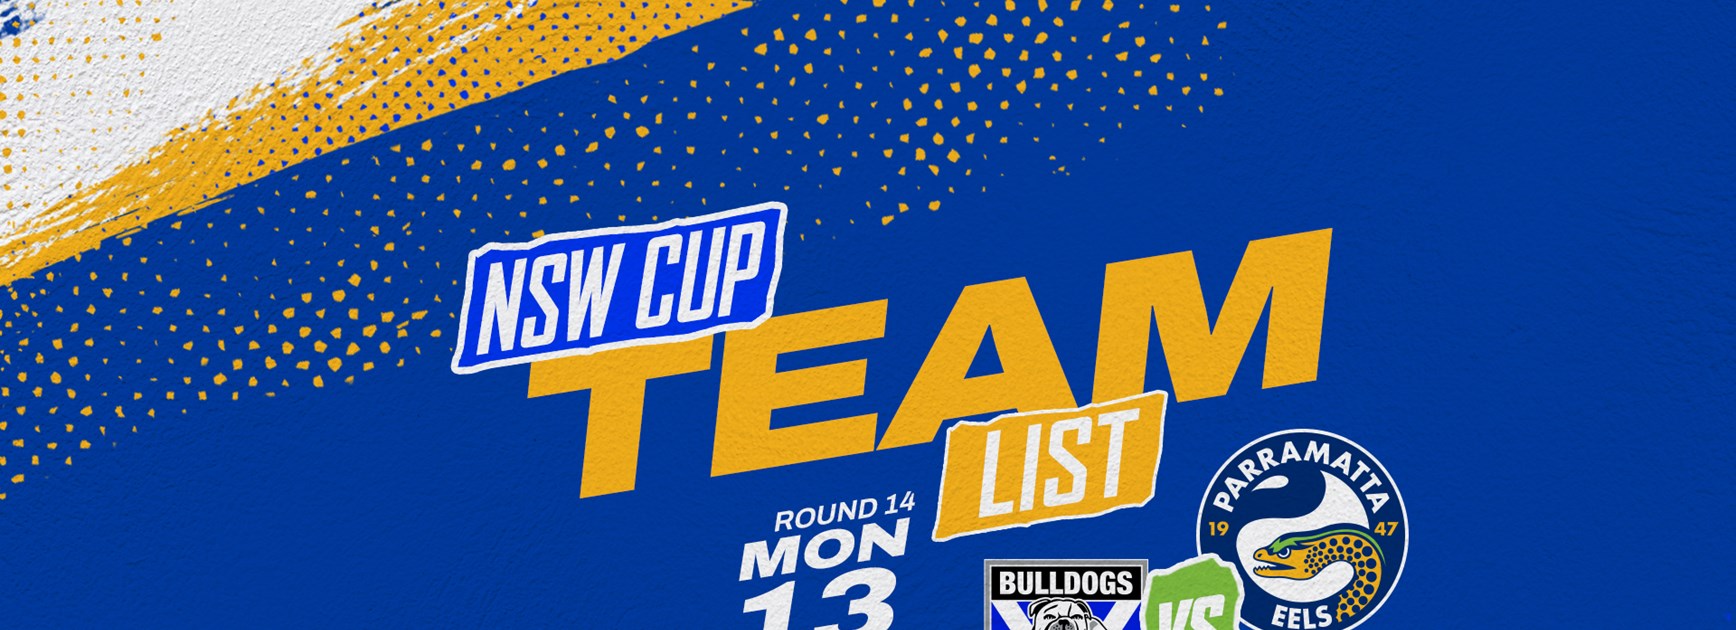 NSW Cup Team List - Bulldogs v Eels, Round 14